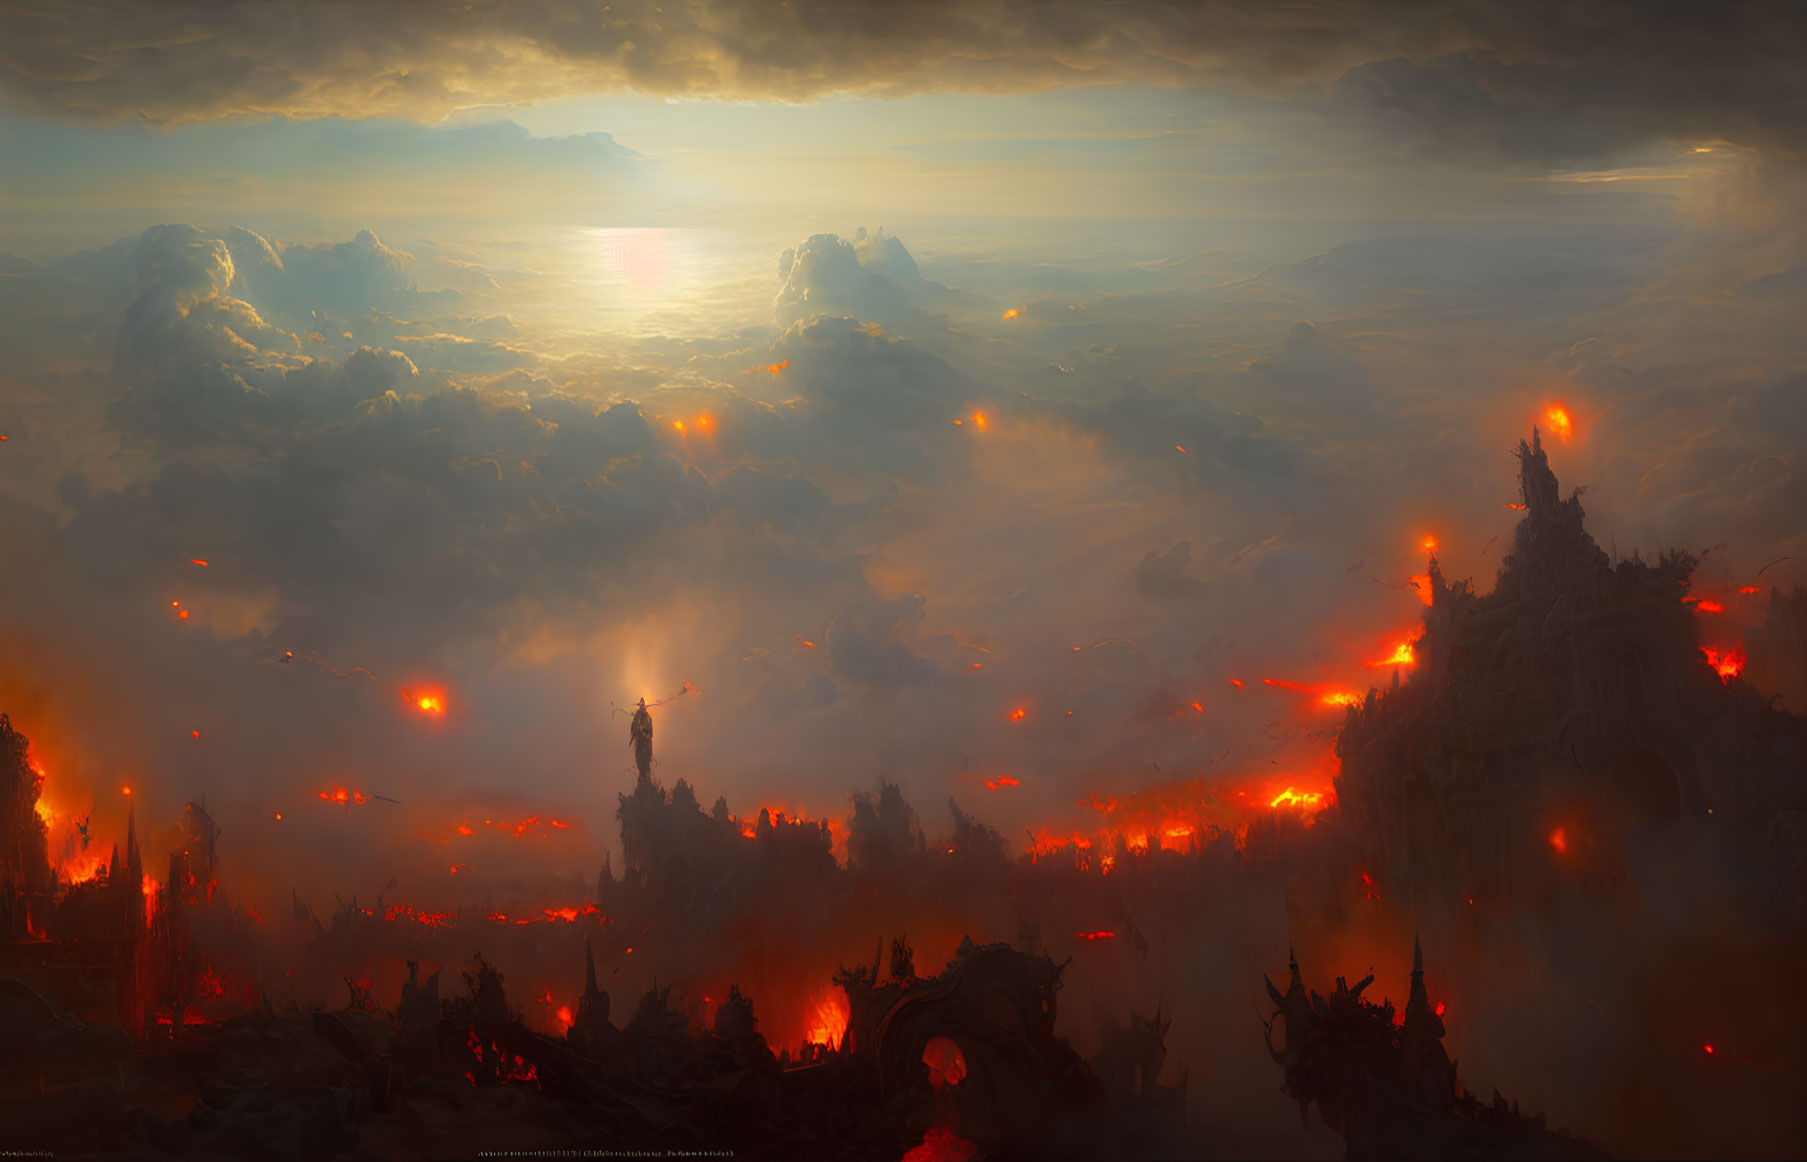 Fiery landscape with flowing lava amidst ruins at sunset